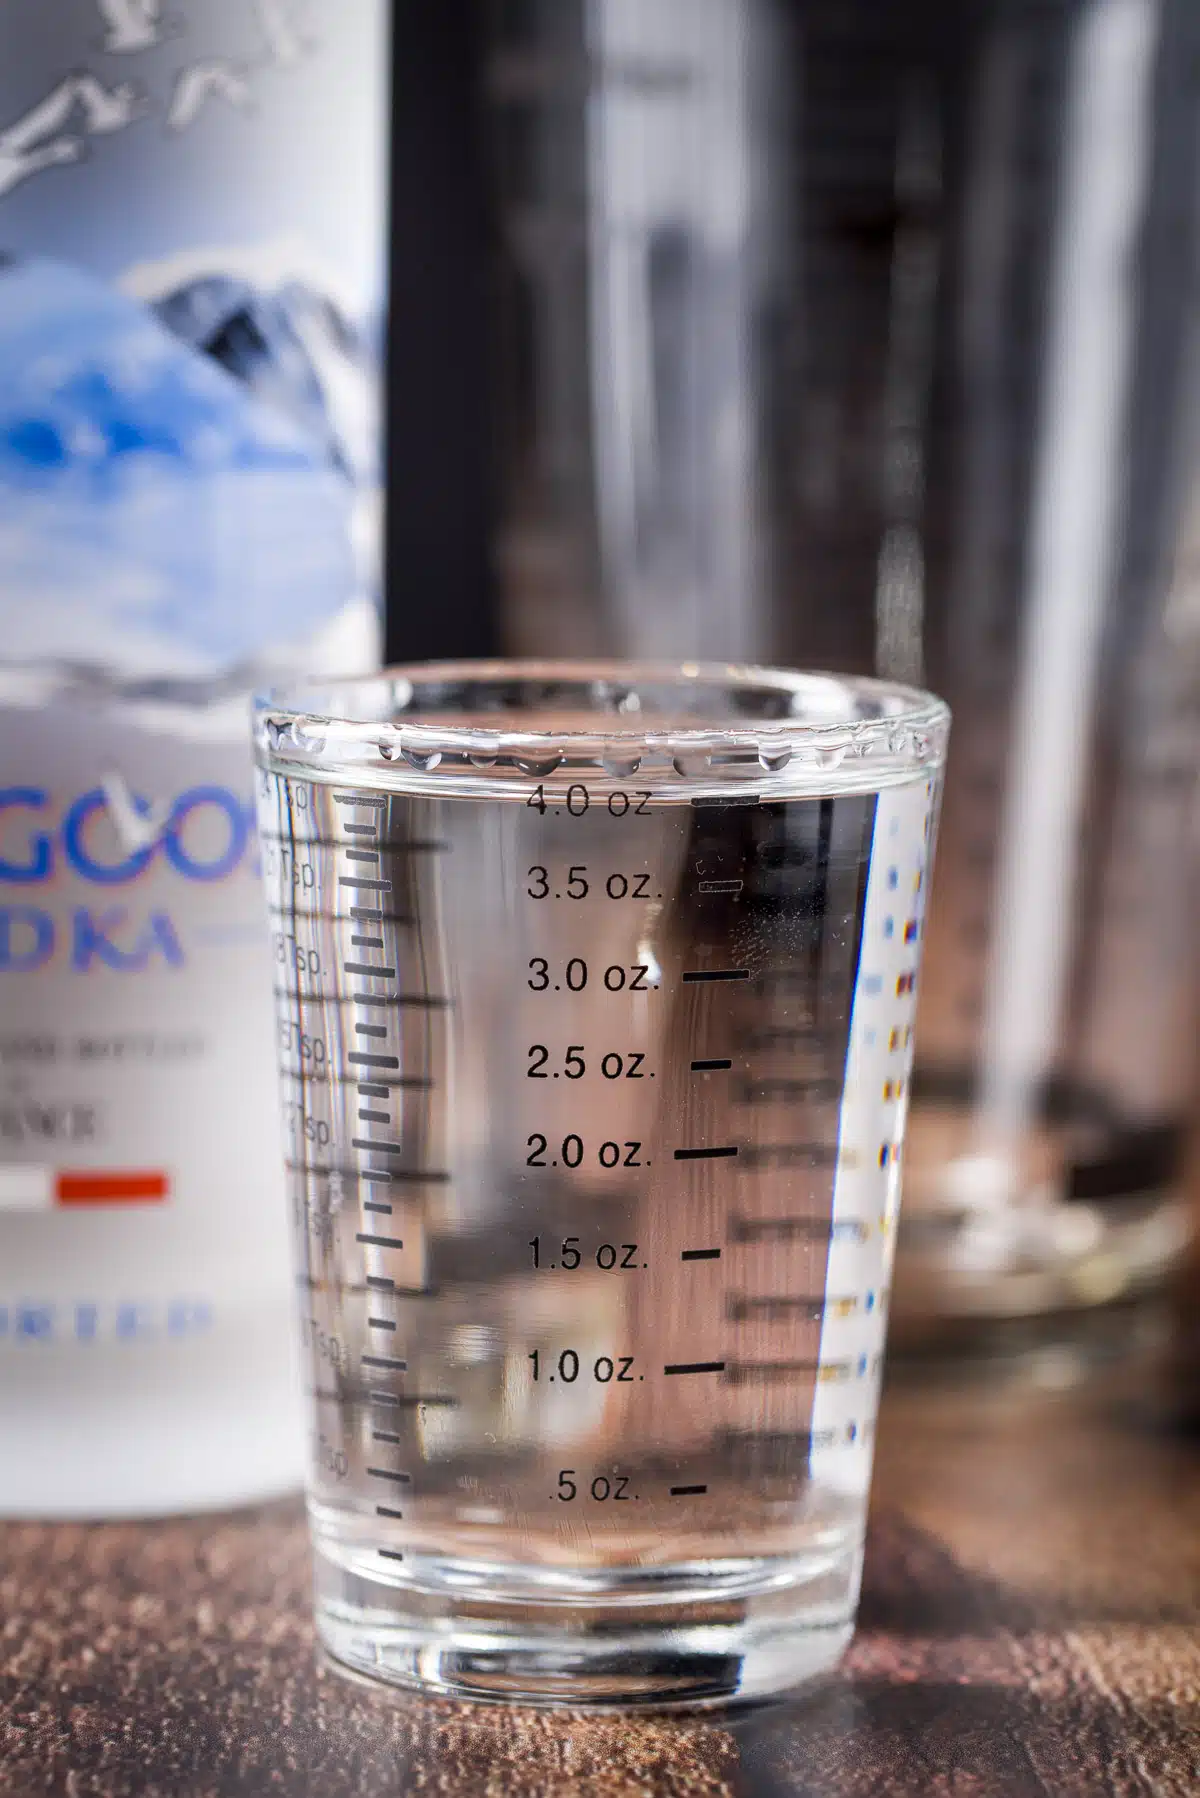 Vodka measured out with the bottle behind